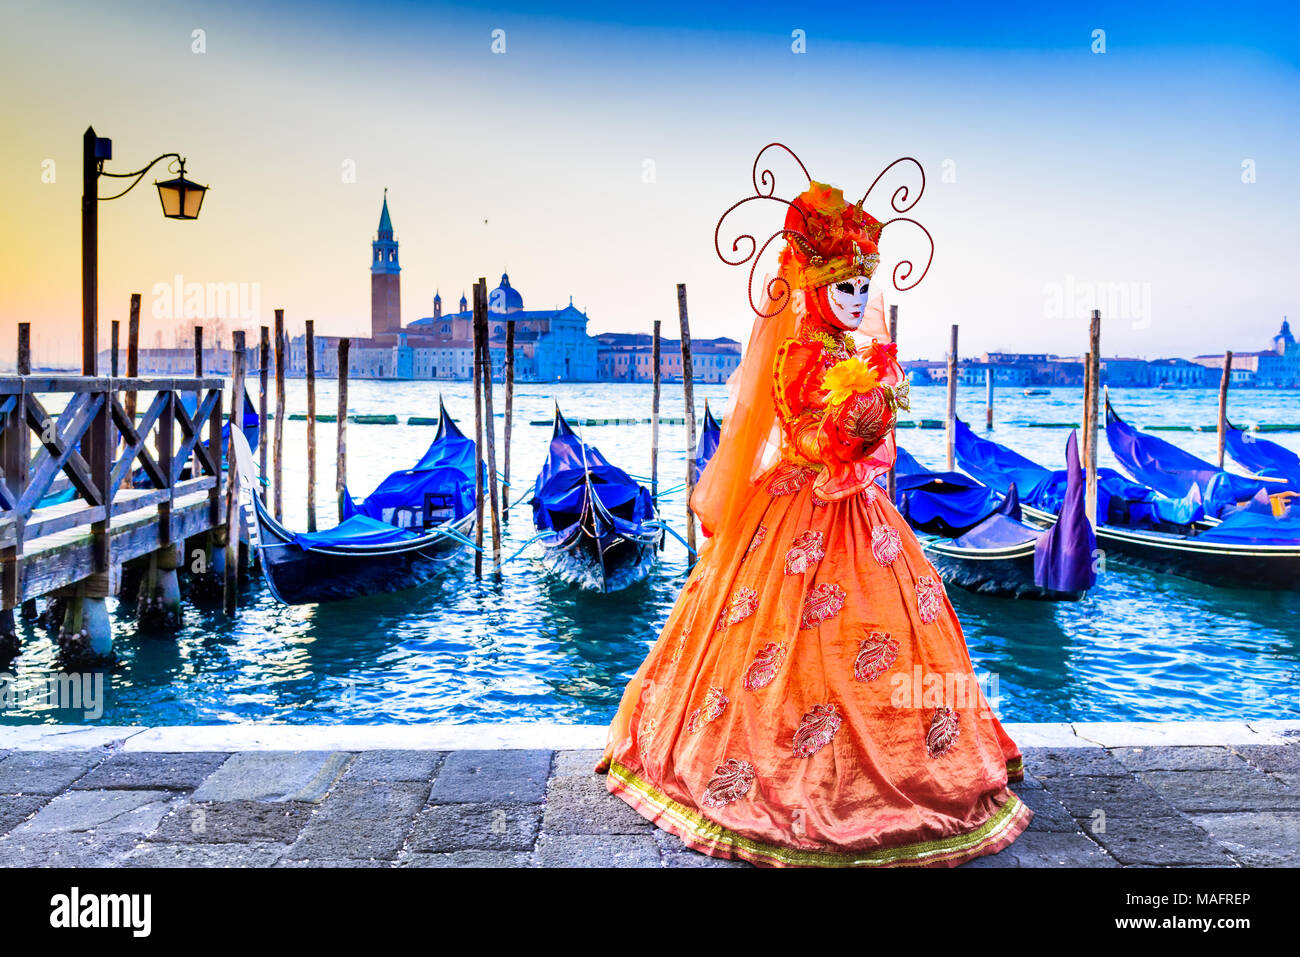 Venice, Italy - 9th February 2018: Carnival of Venice, beautiful mask at Piazza San Marco with gondolas and Grand Canal. Stock Photo